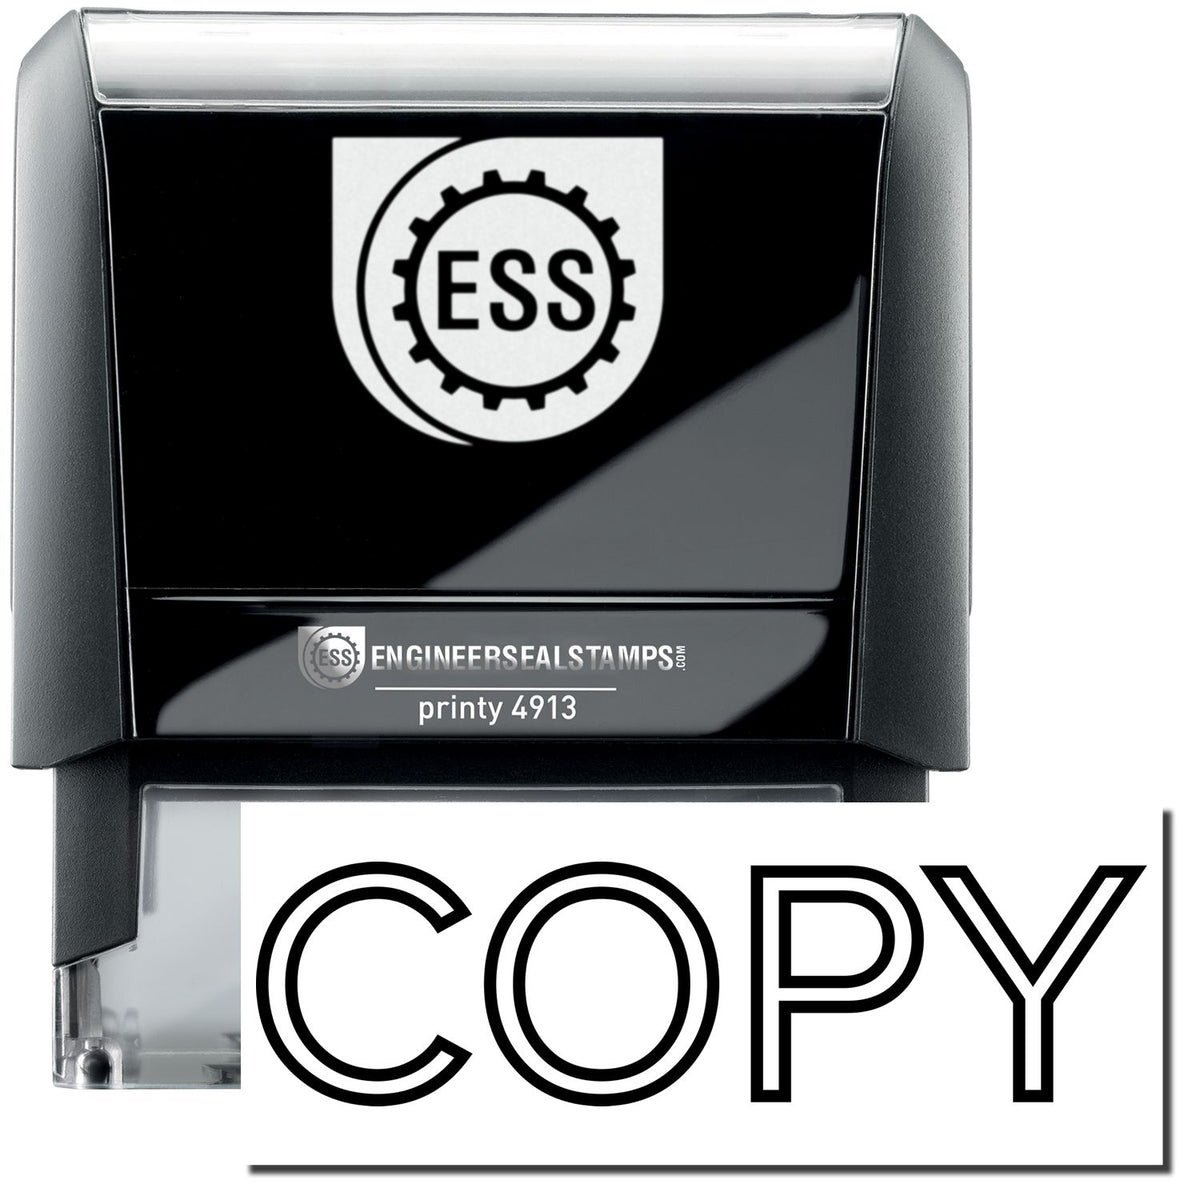 A self-inking stamp with a stamped image showing how the text &quot;COPY&quot; in a large outline font is displayed by it after stamping.